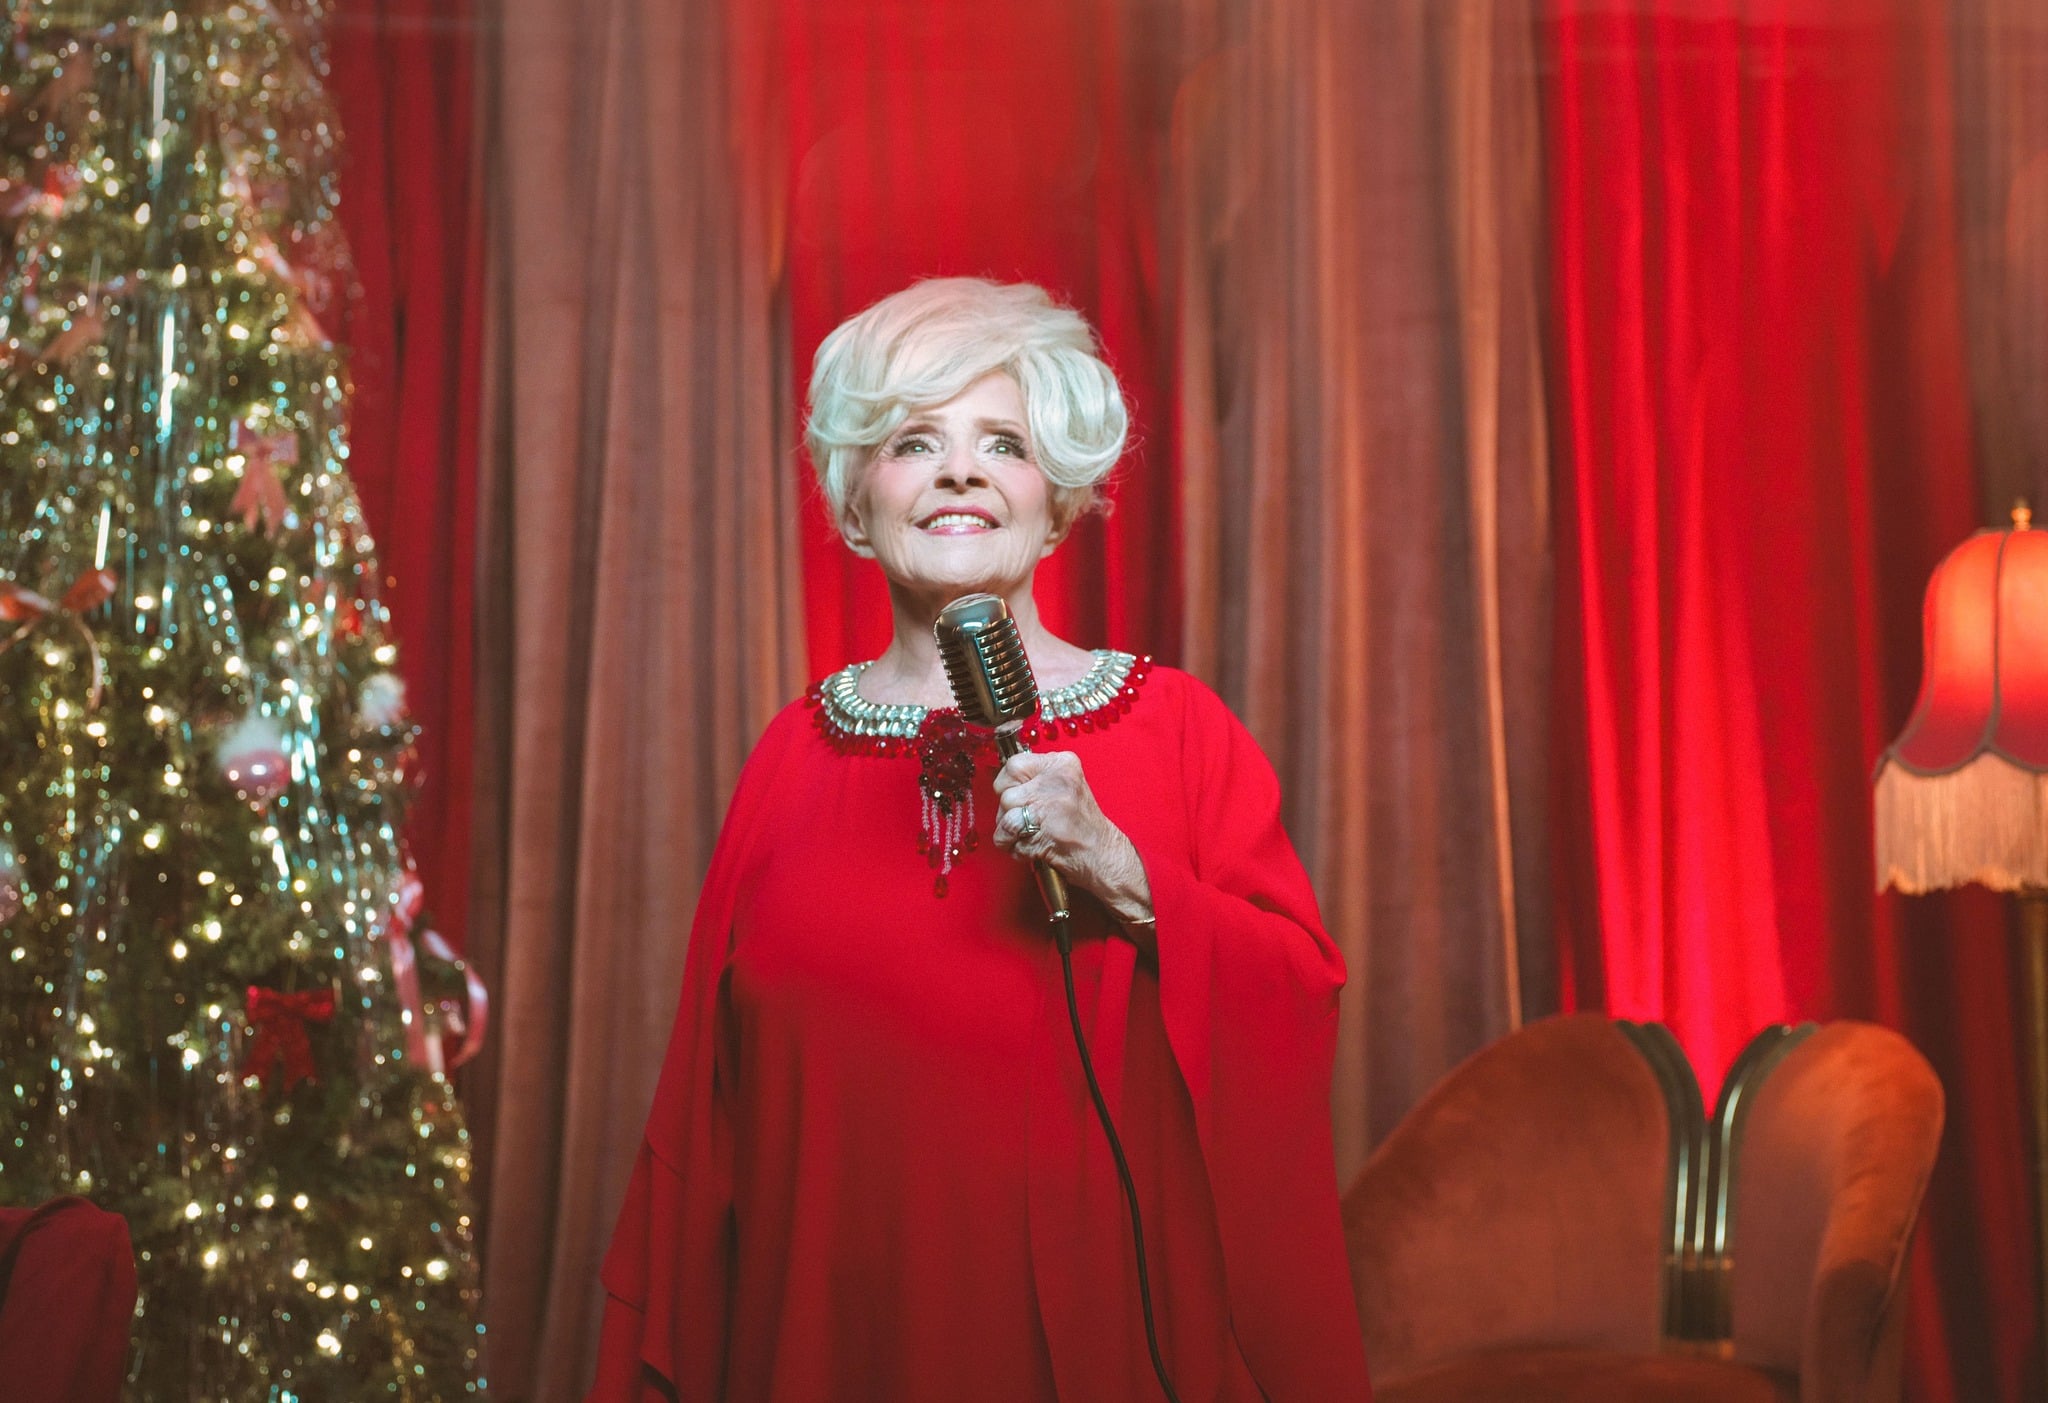 Carrie Underwood covered "Rockin' Around the Christmas Tree" by Brenda Lee, which turned 65 in 2023